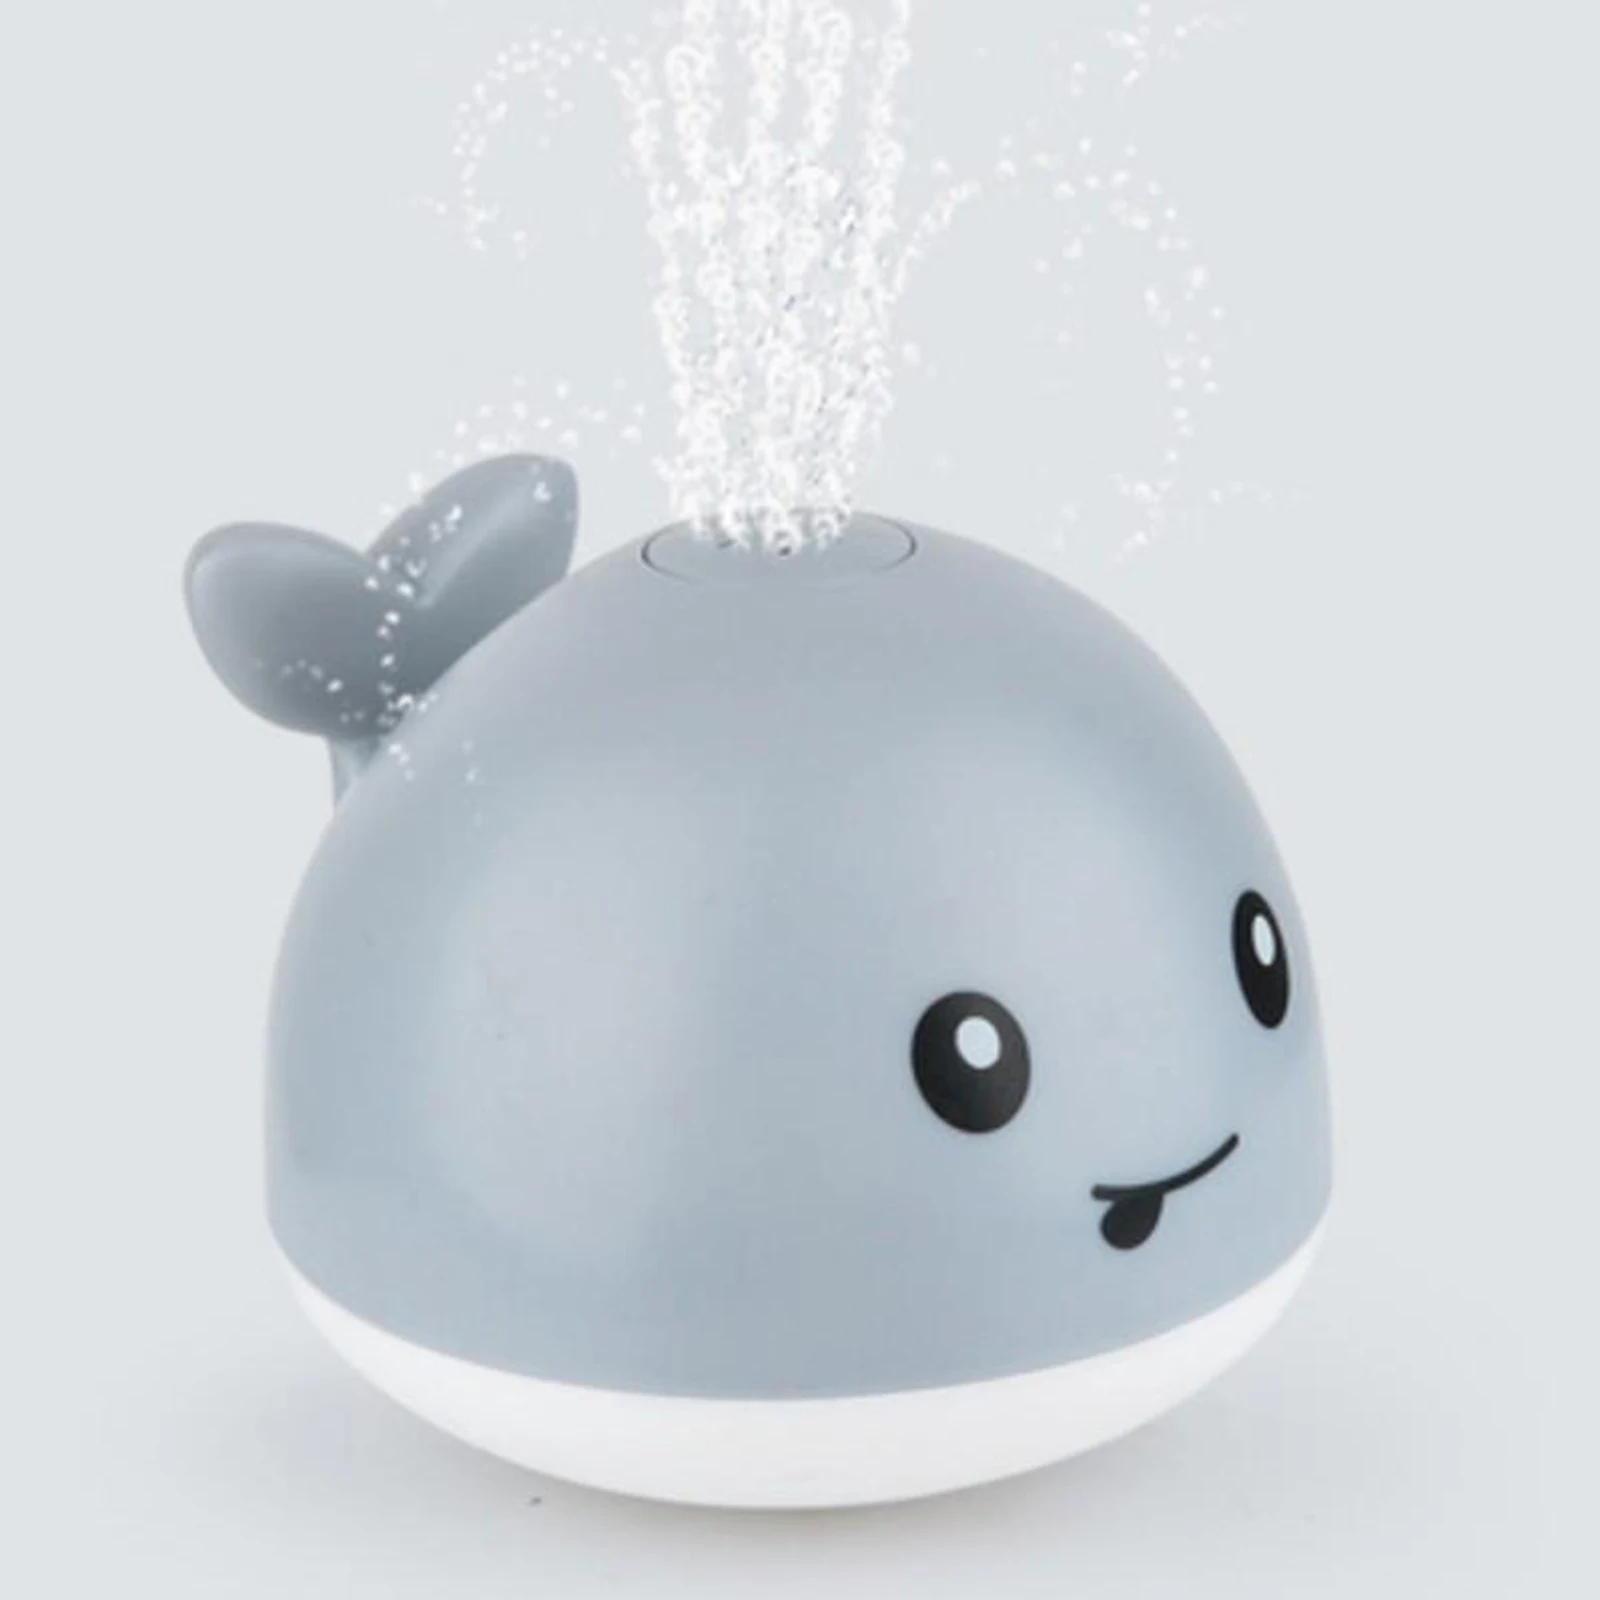 Baby Bath Toys Light Up Bath Toys Automatic Electric Induction Whale Sprinkler Baby Bath Fun Toys